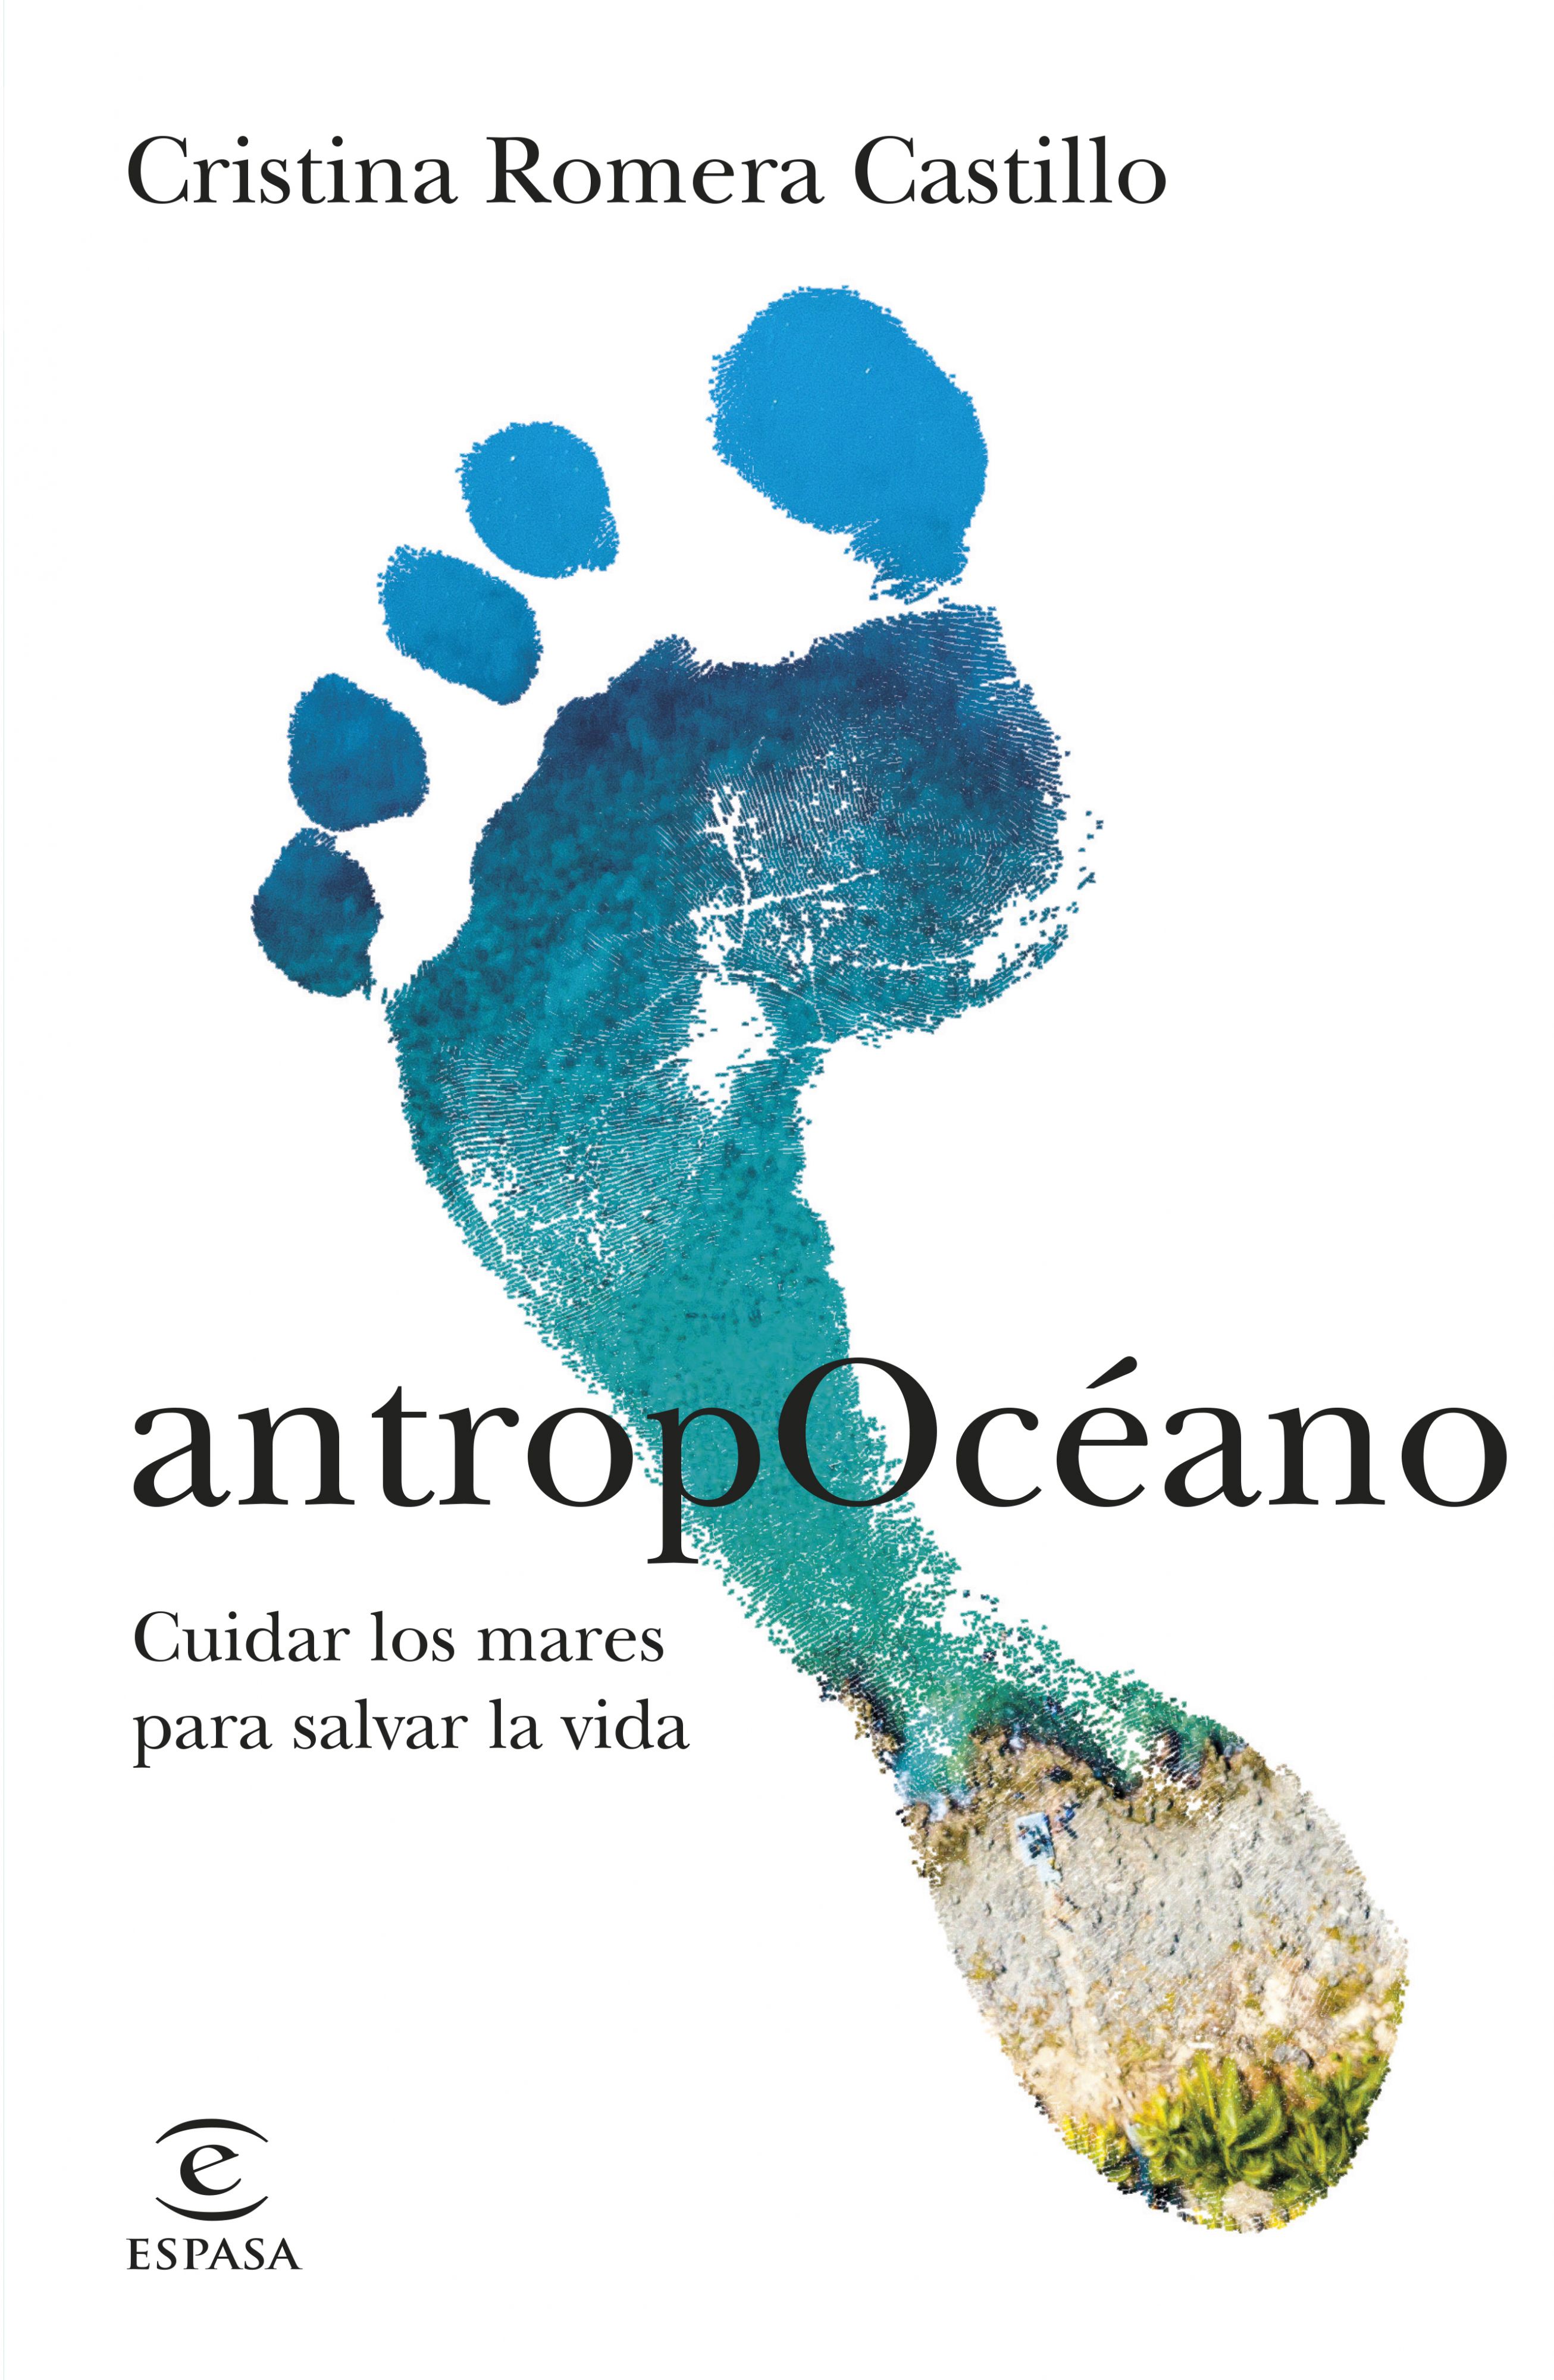 book cover "Anthropocene.  Taking care of the seas to save lives"by Cristina Romera Castillo.  Courtesy: Planet Books.